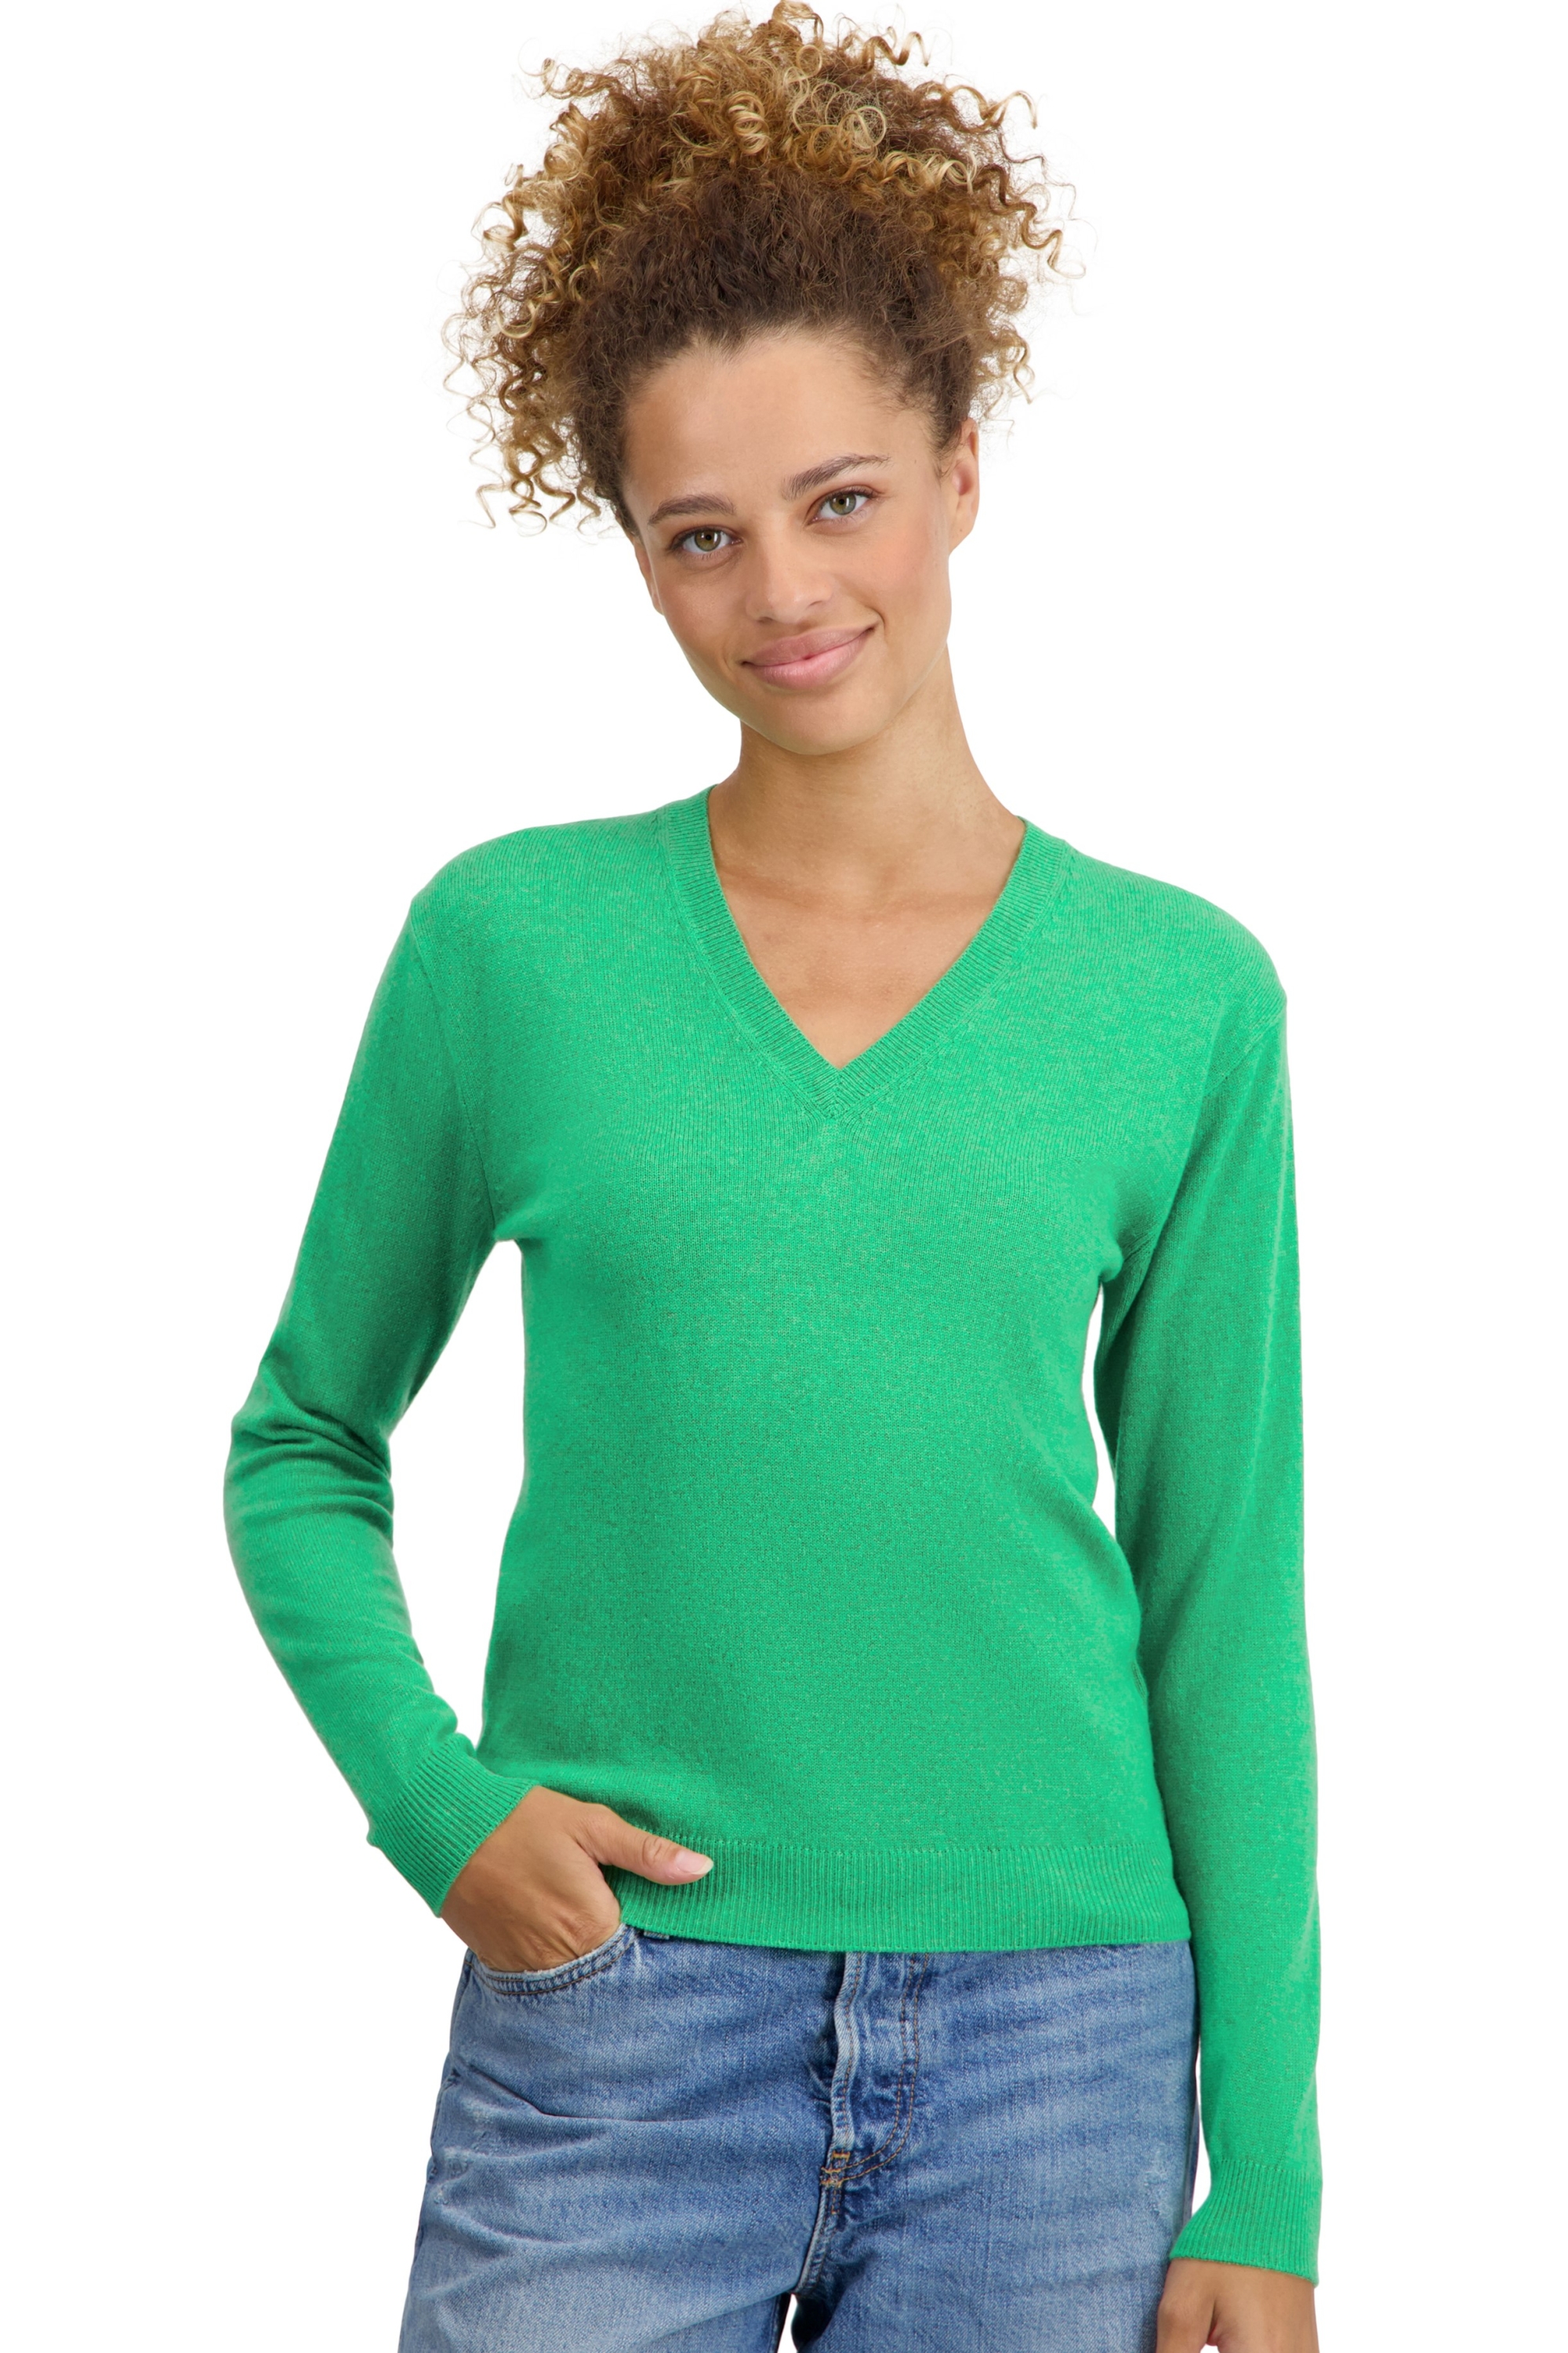 Cashmere ladies basic sweaters at low prices tessa first midori m